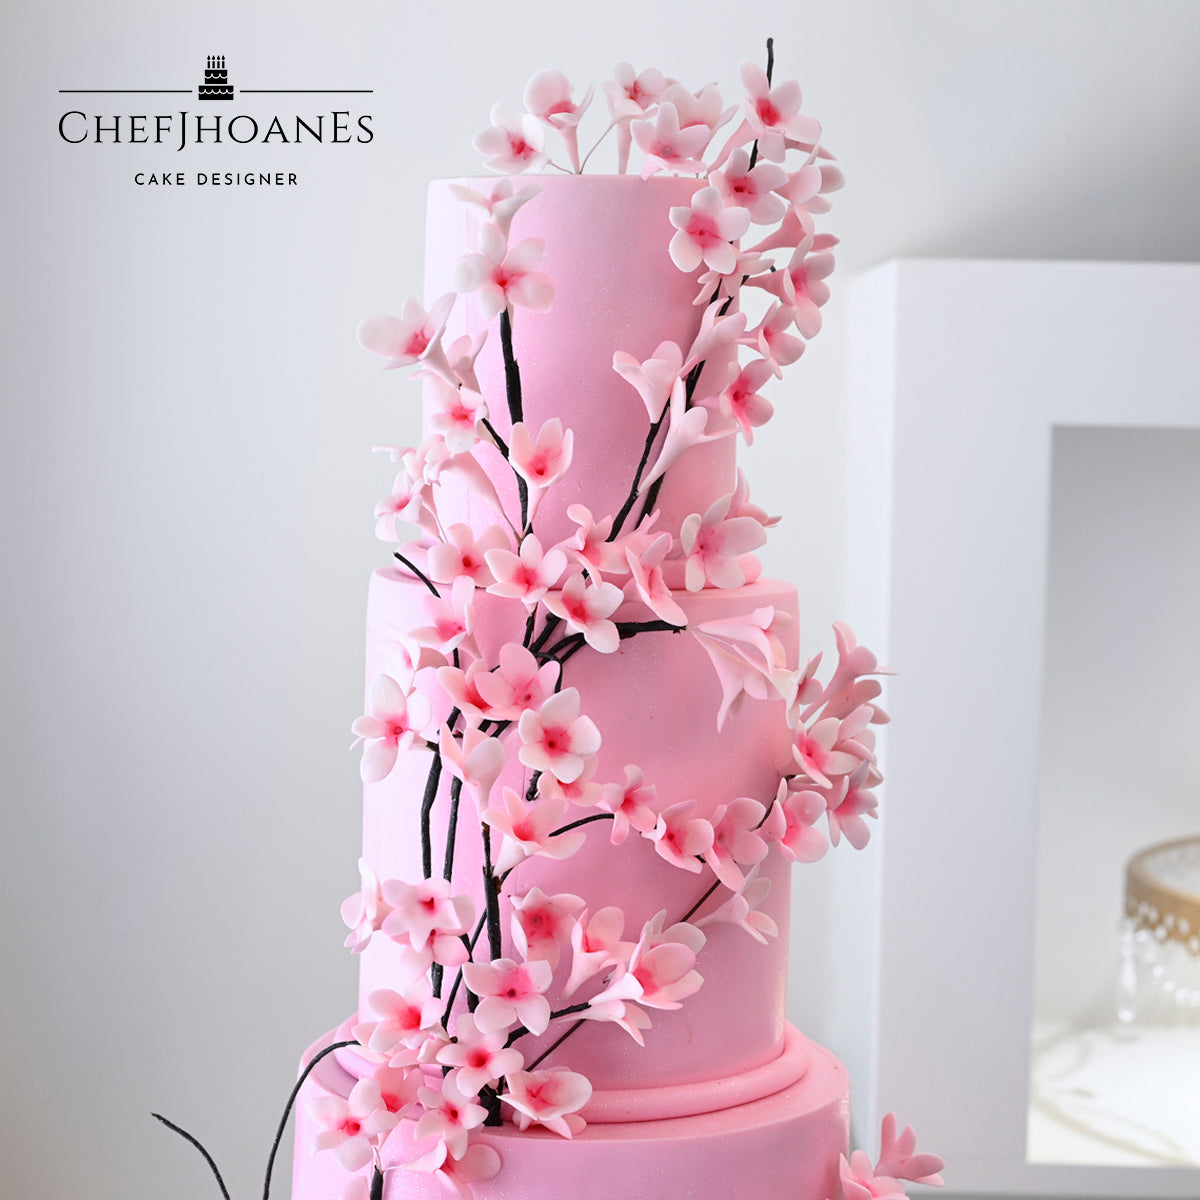 Cherry blossom cake. Feed 100 people.